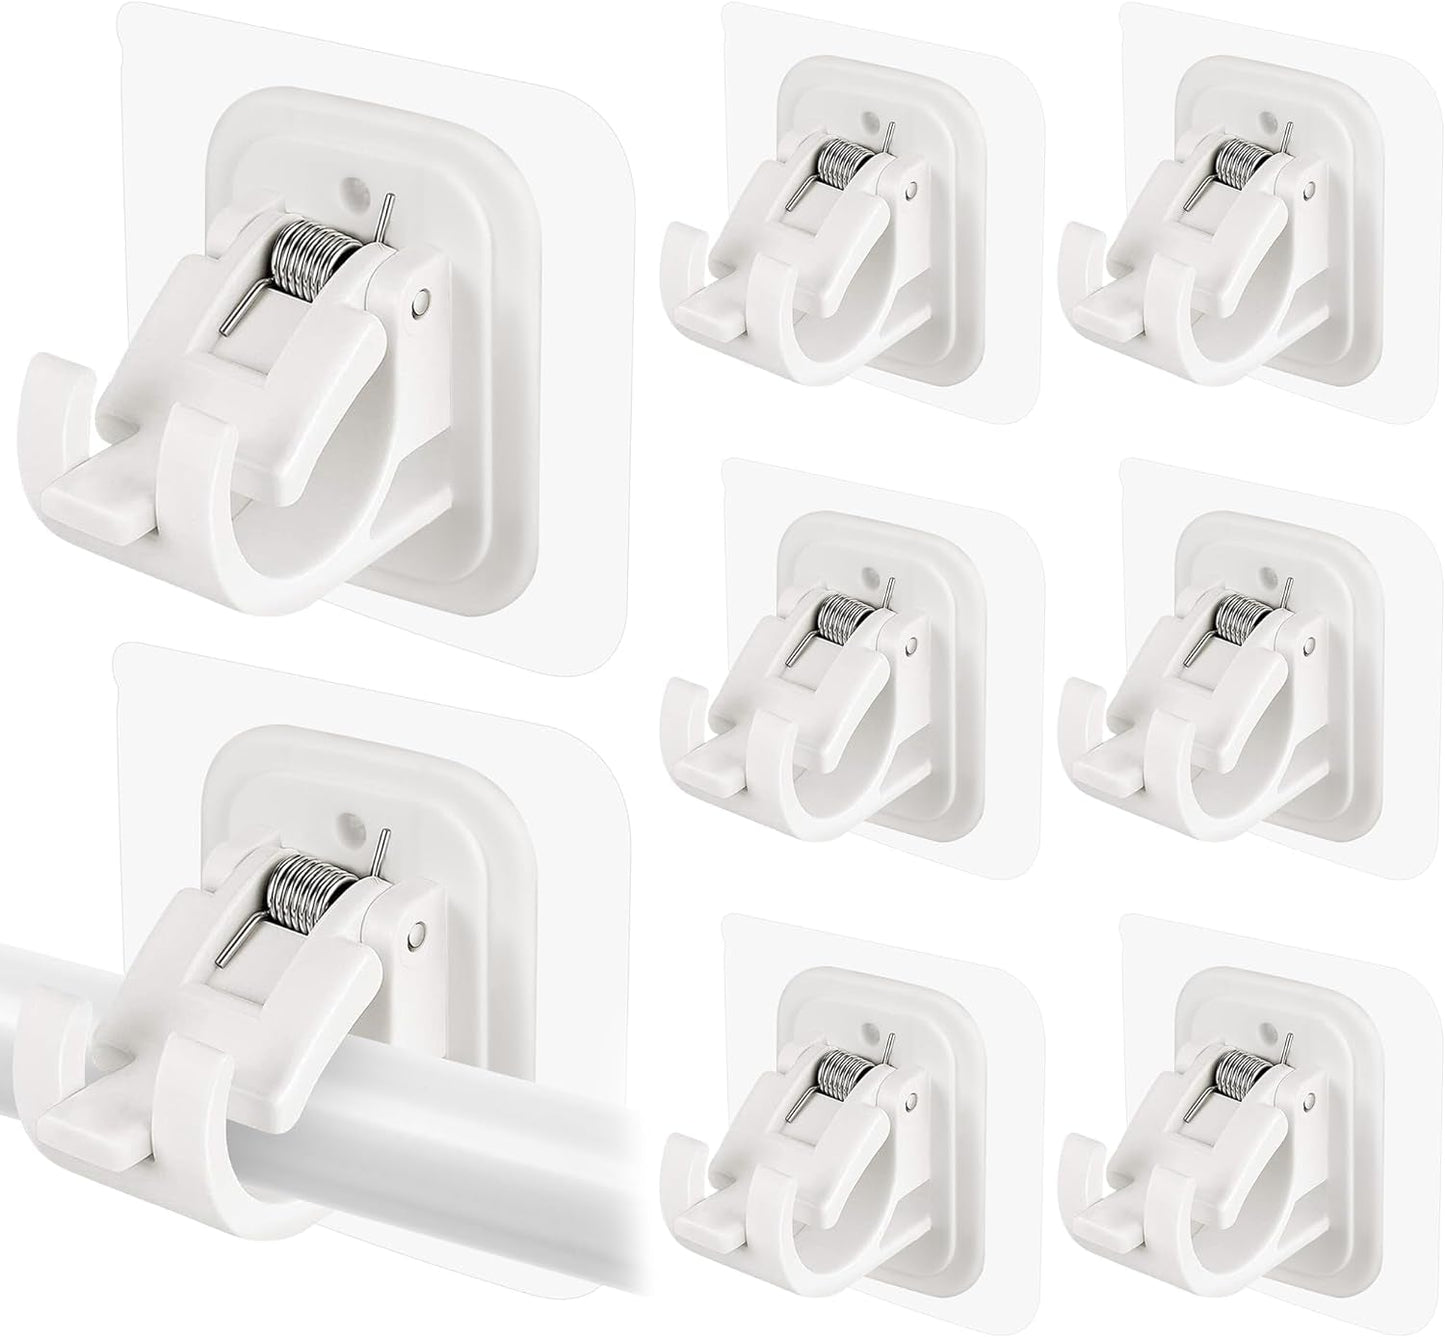 8PCS No Drill Curtain Rod Brackets No Drilling Self Adhesive Curtain Rod Holder Hooks Nail Free Adjustable Curtain Rod Hooks Curtain Hangers for Bathroom Kitchen Home Bathroom and Hotel (Transparent)